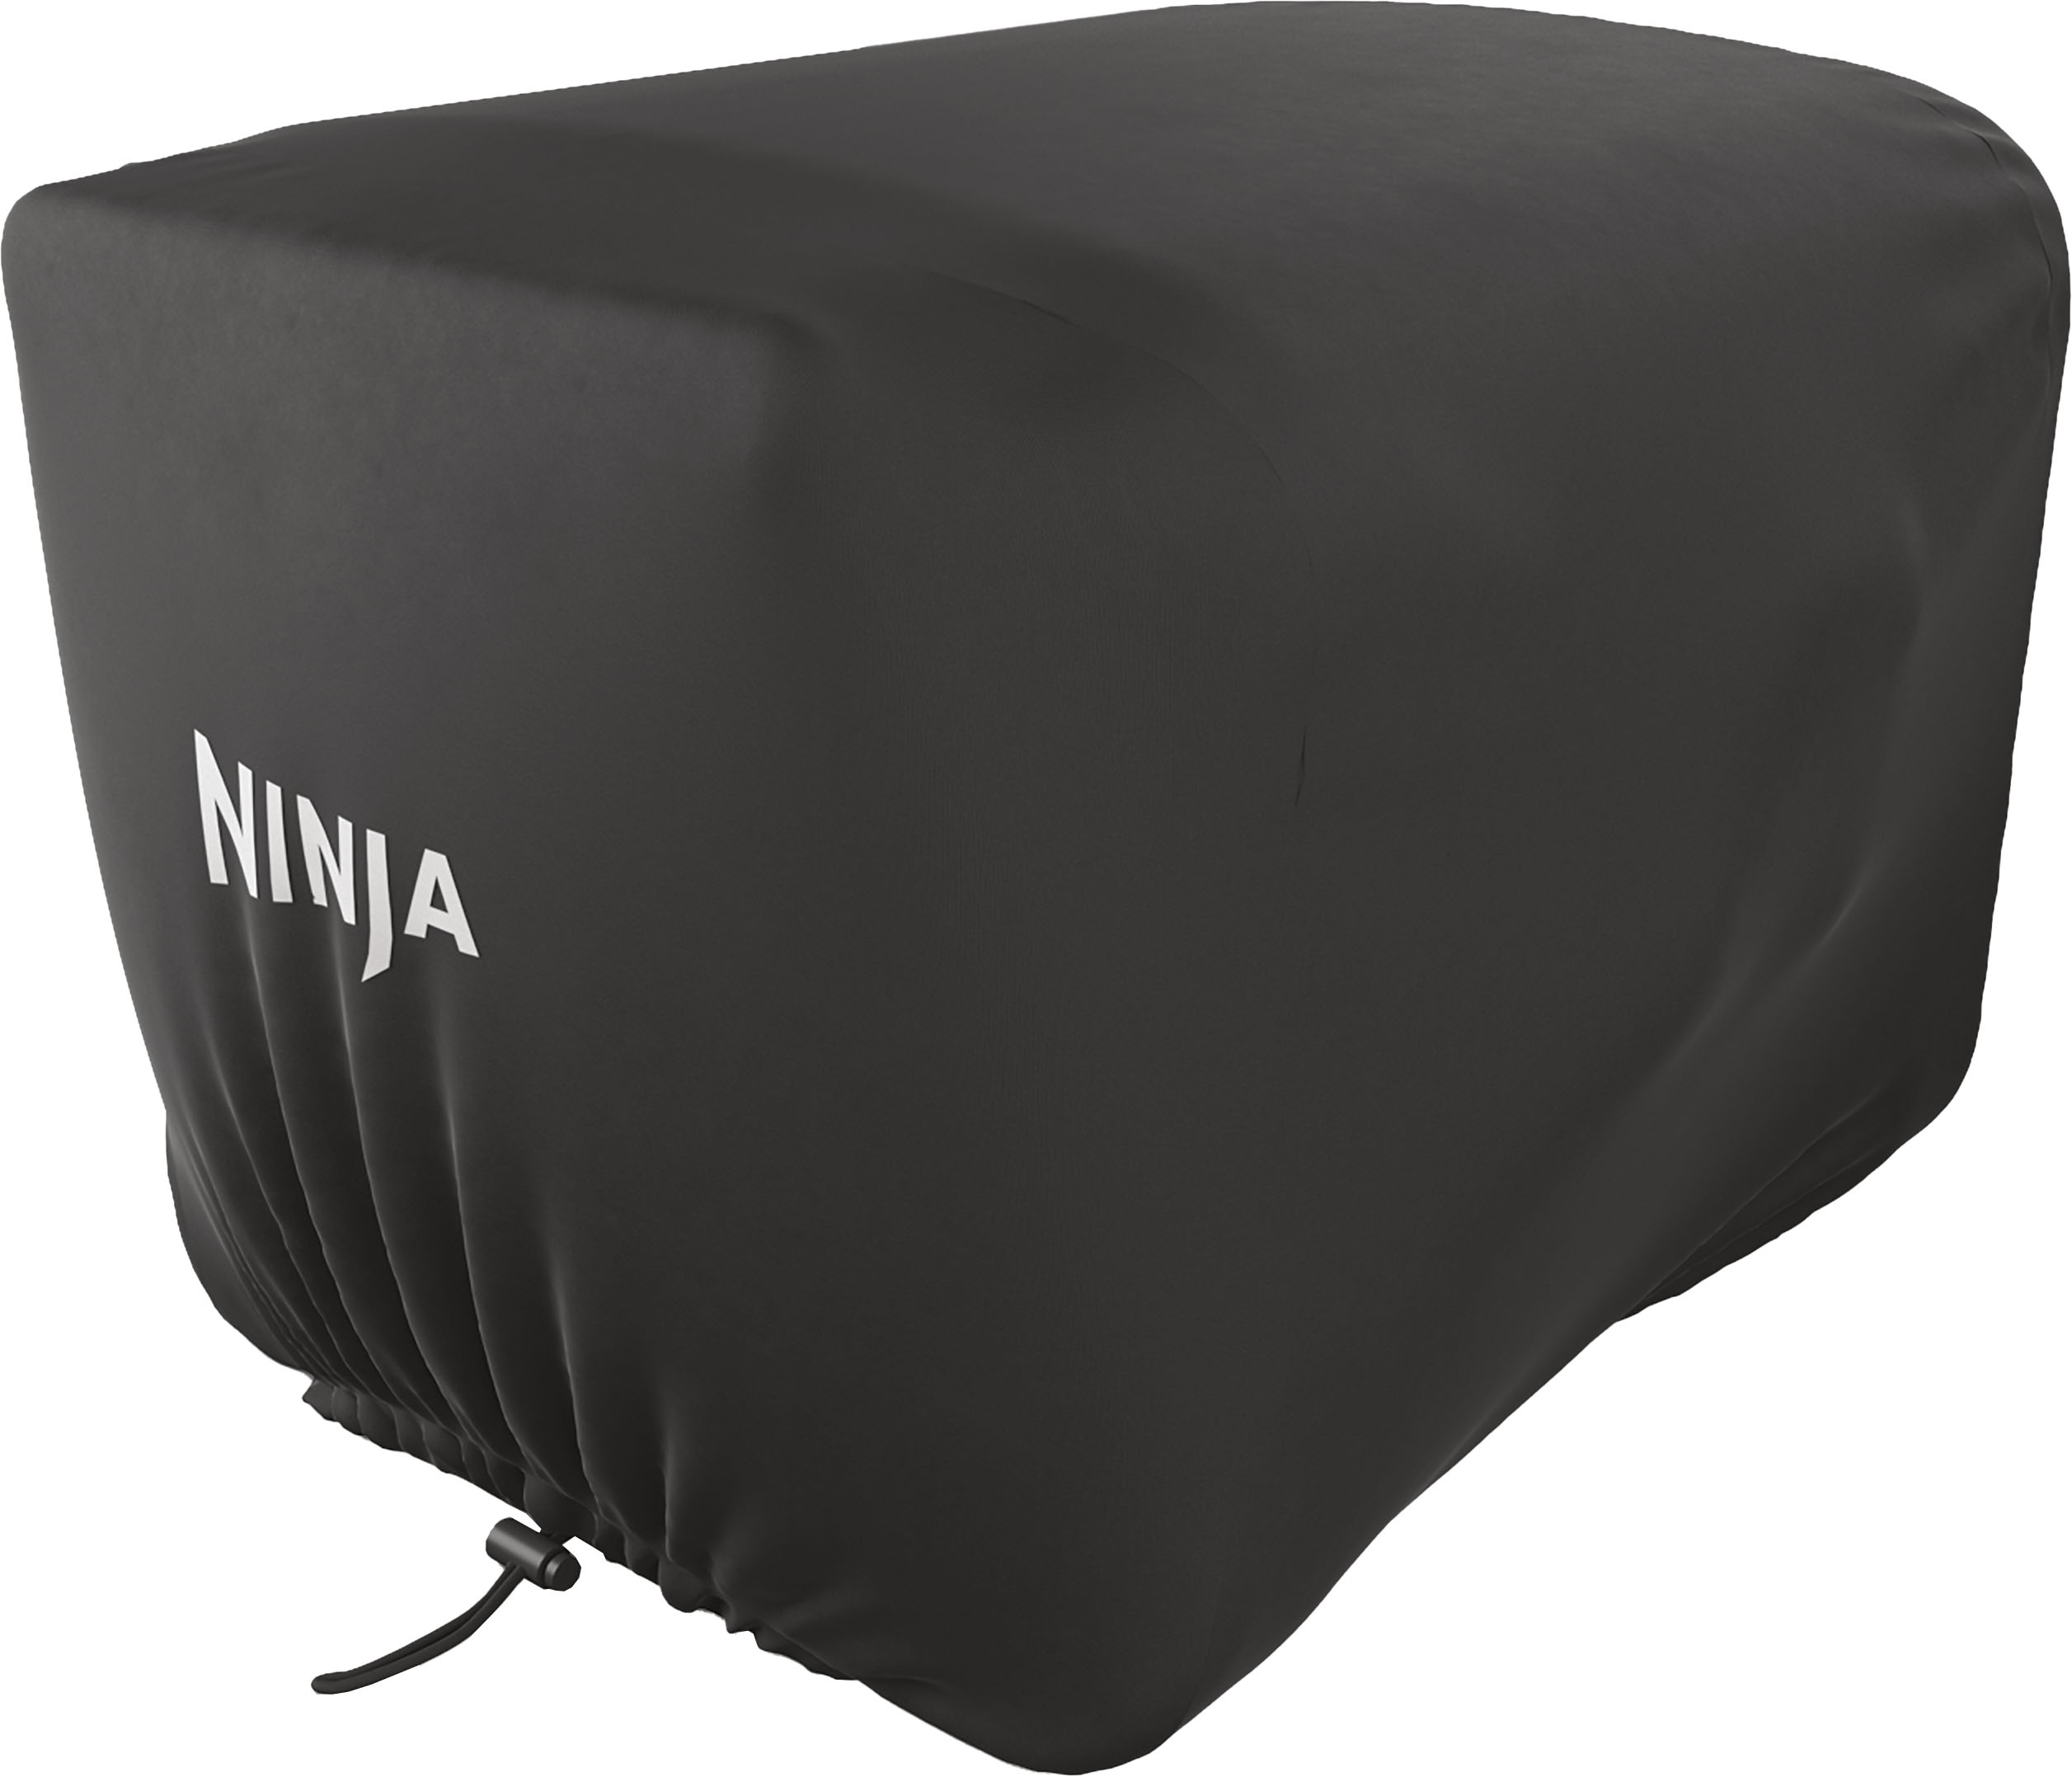  TRAVELIT Waterproof Cover for Ninja Woodfire Outdoor Oven  OO101 Series, Pizza Oven Cover with Adjustable Drawstrings and Elastic  Bands, Pizza Oven Accessories, Black (Cover Only) : Patio, Lawn & Garden